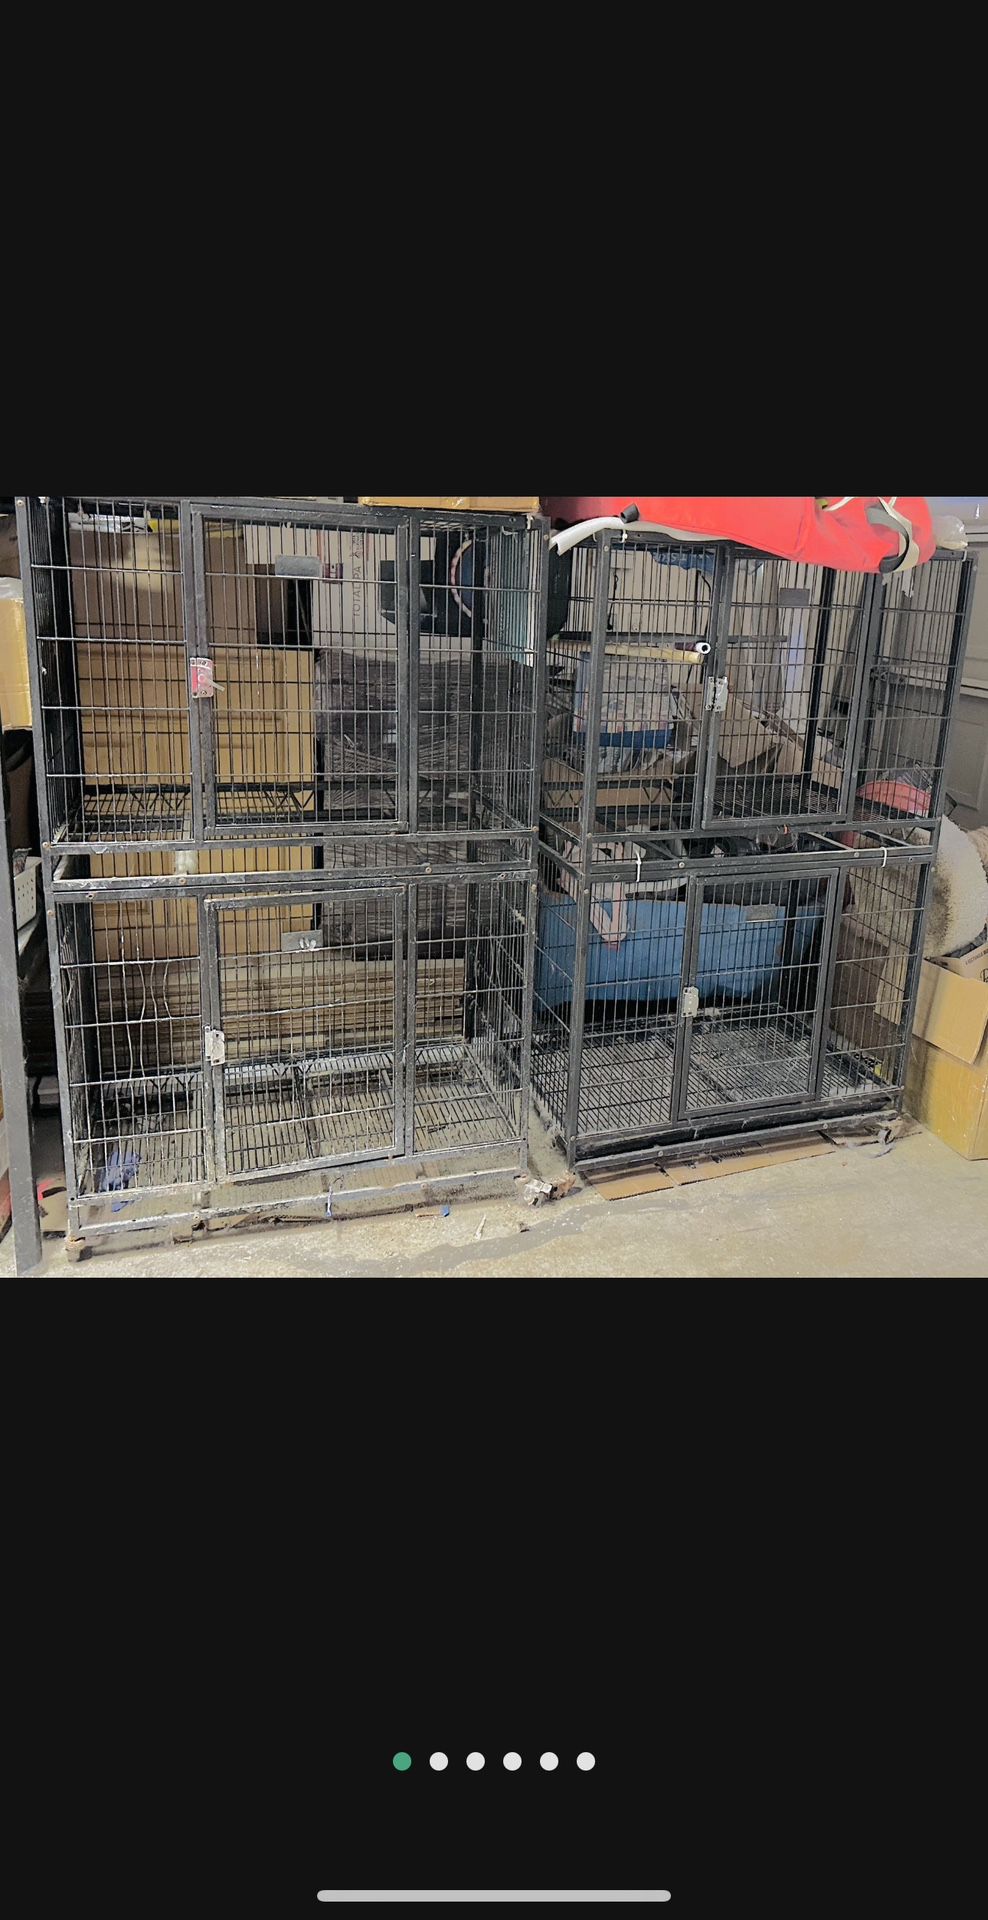 3 Animal Cages For Pets Dog Cat Rabbit Chicken Crate Container Carrier 